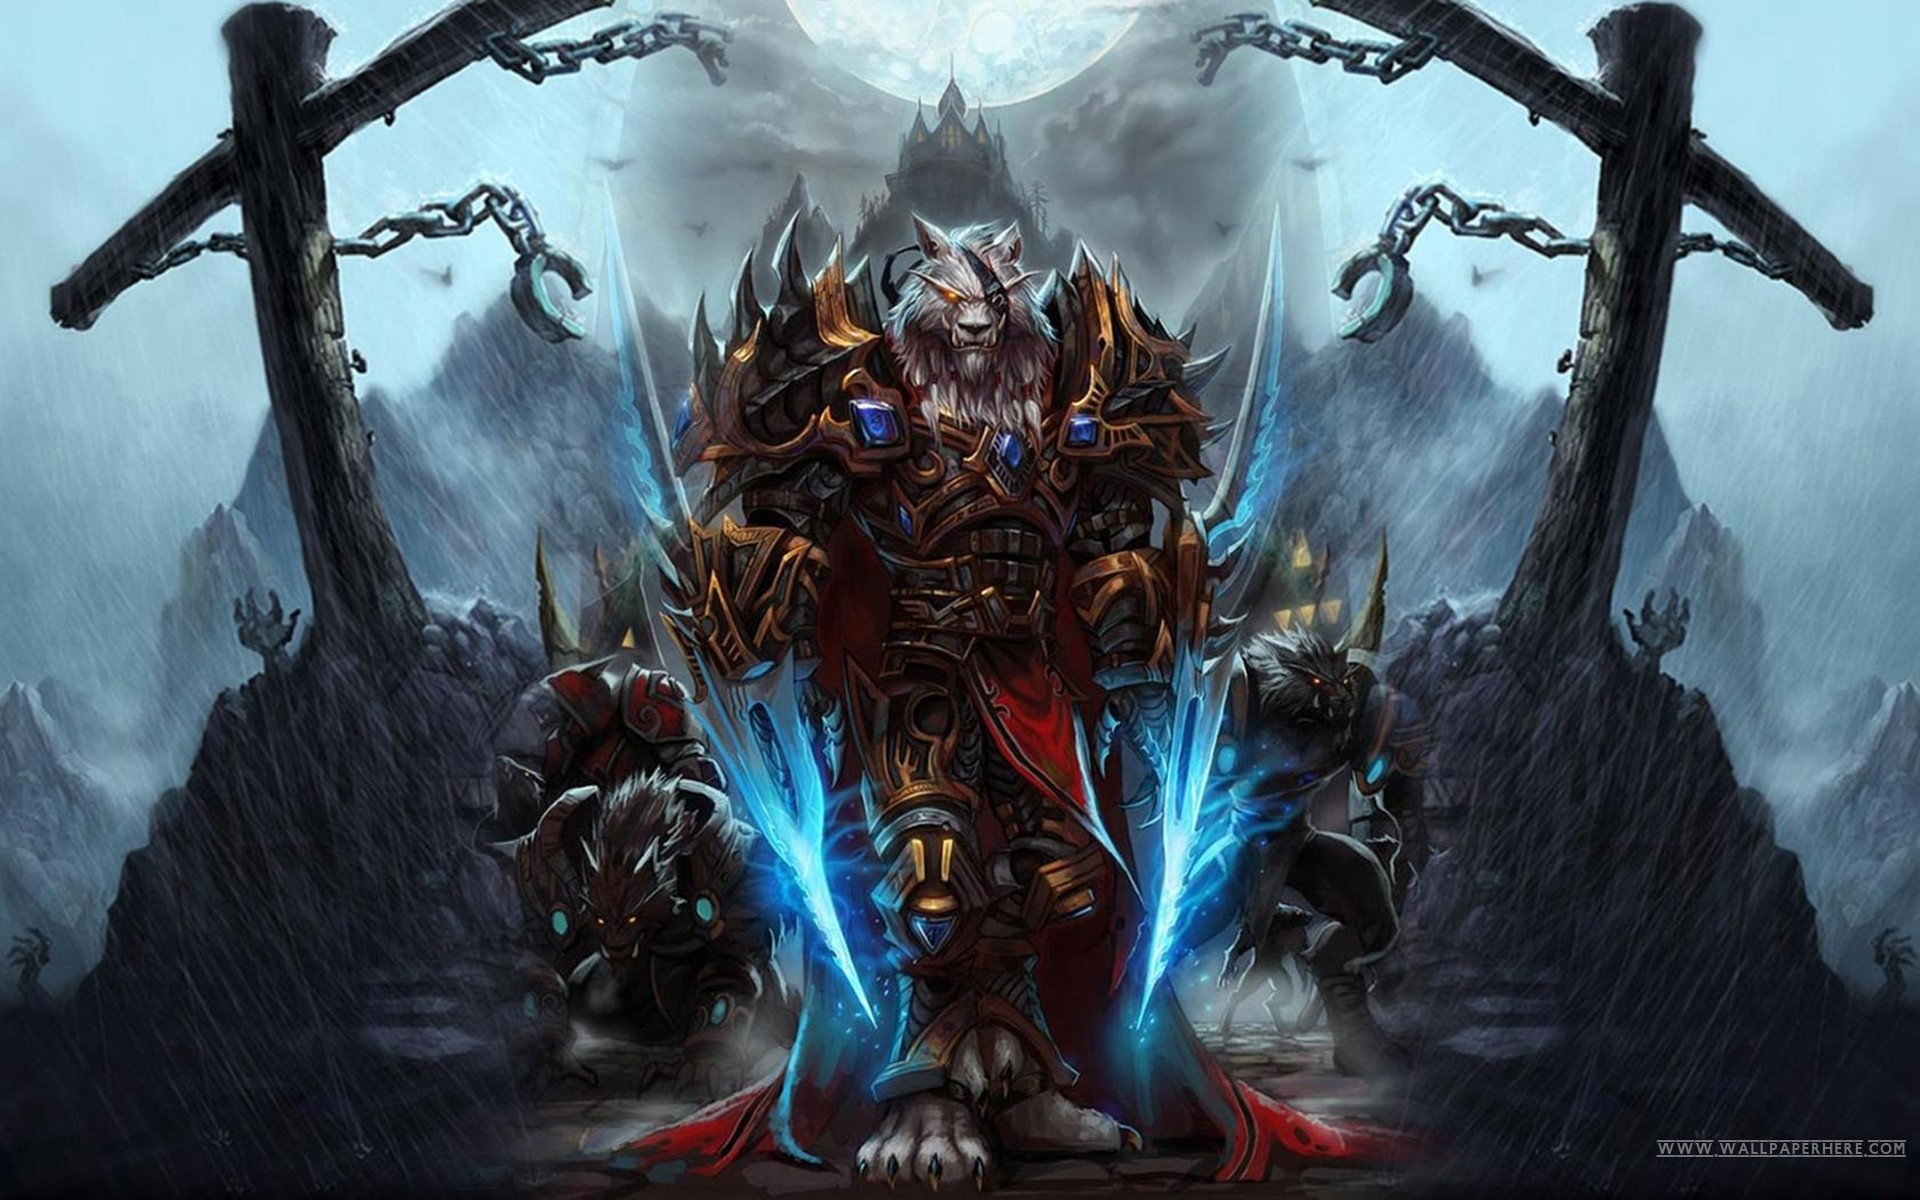 1920x1200 Full HD Wallpapers World Of Warcraft 1022.61 Kb